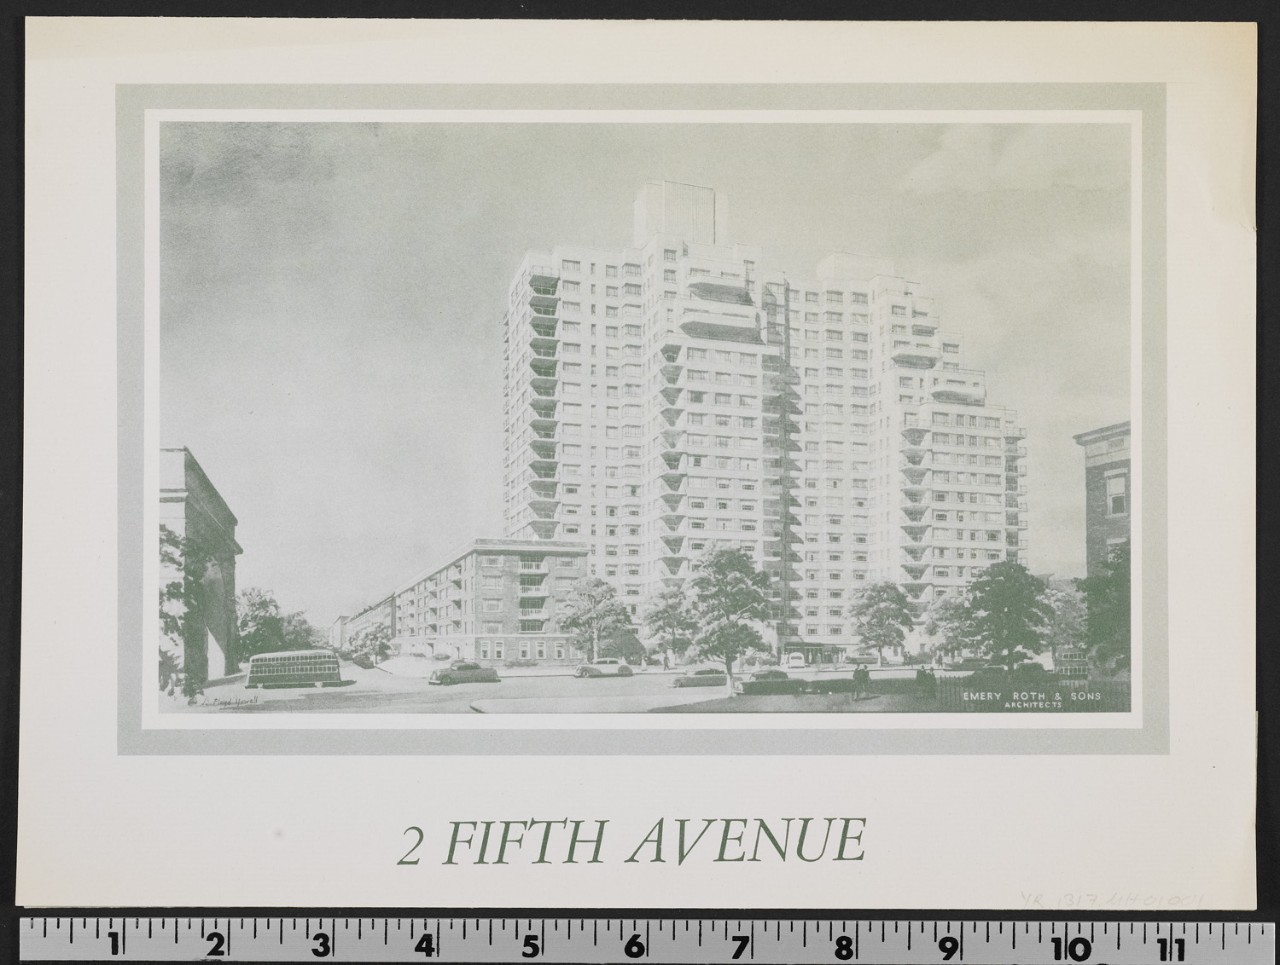 2 Fifth Ave real estate brochure cover